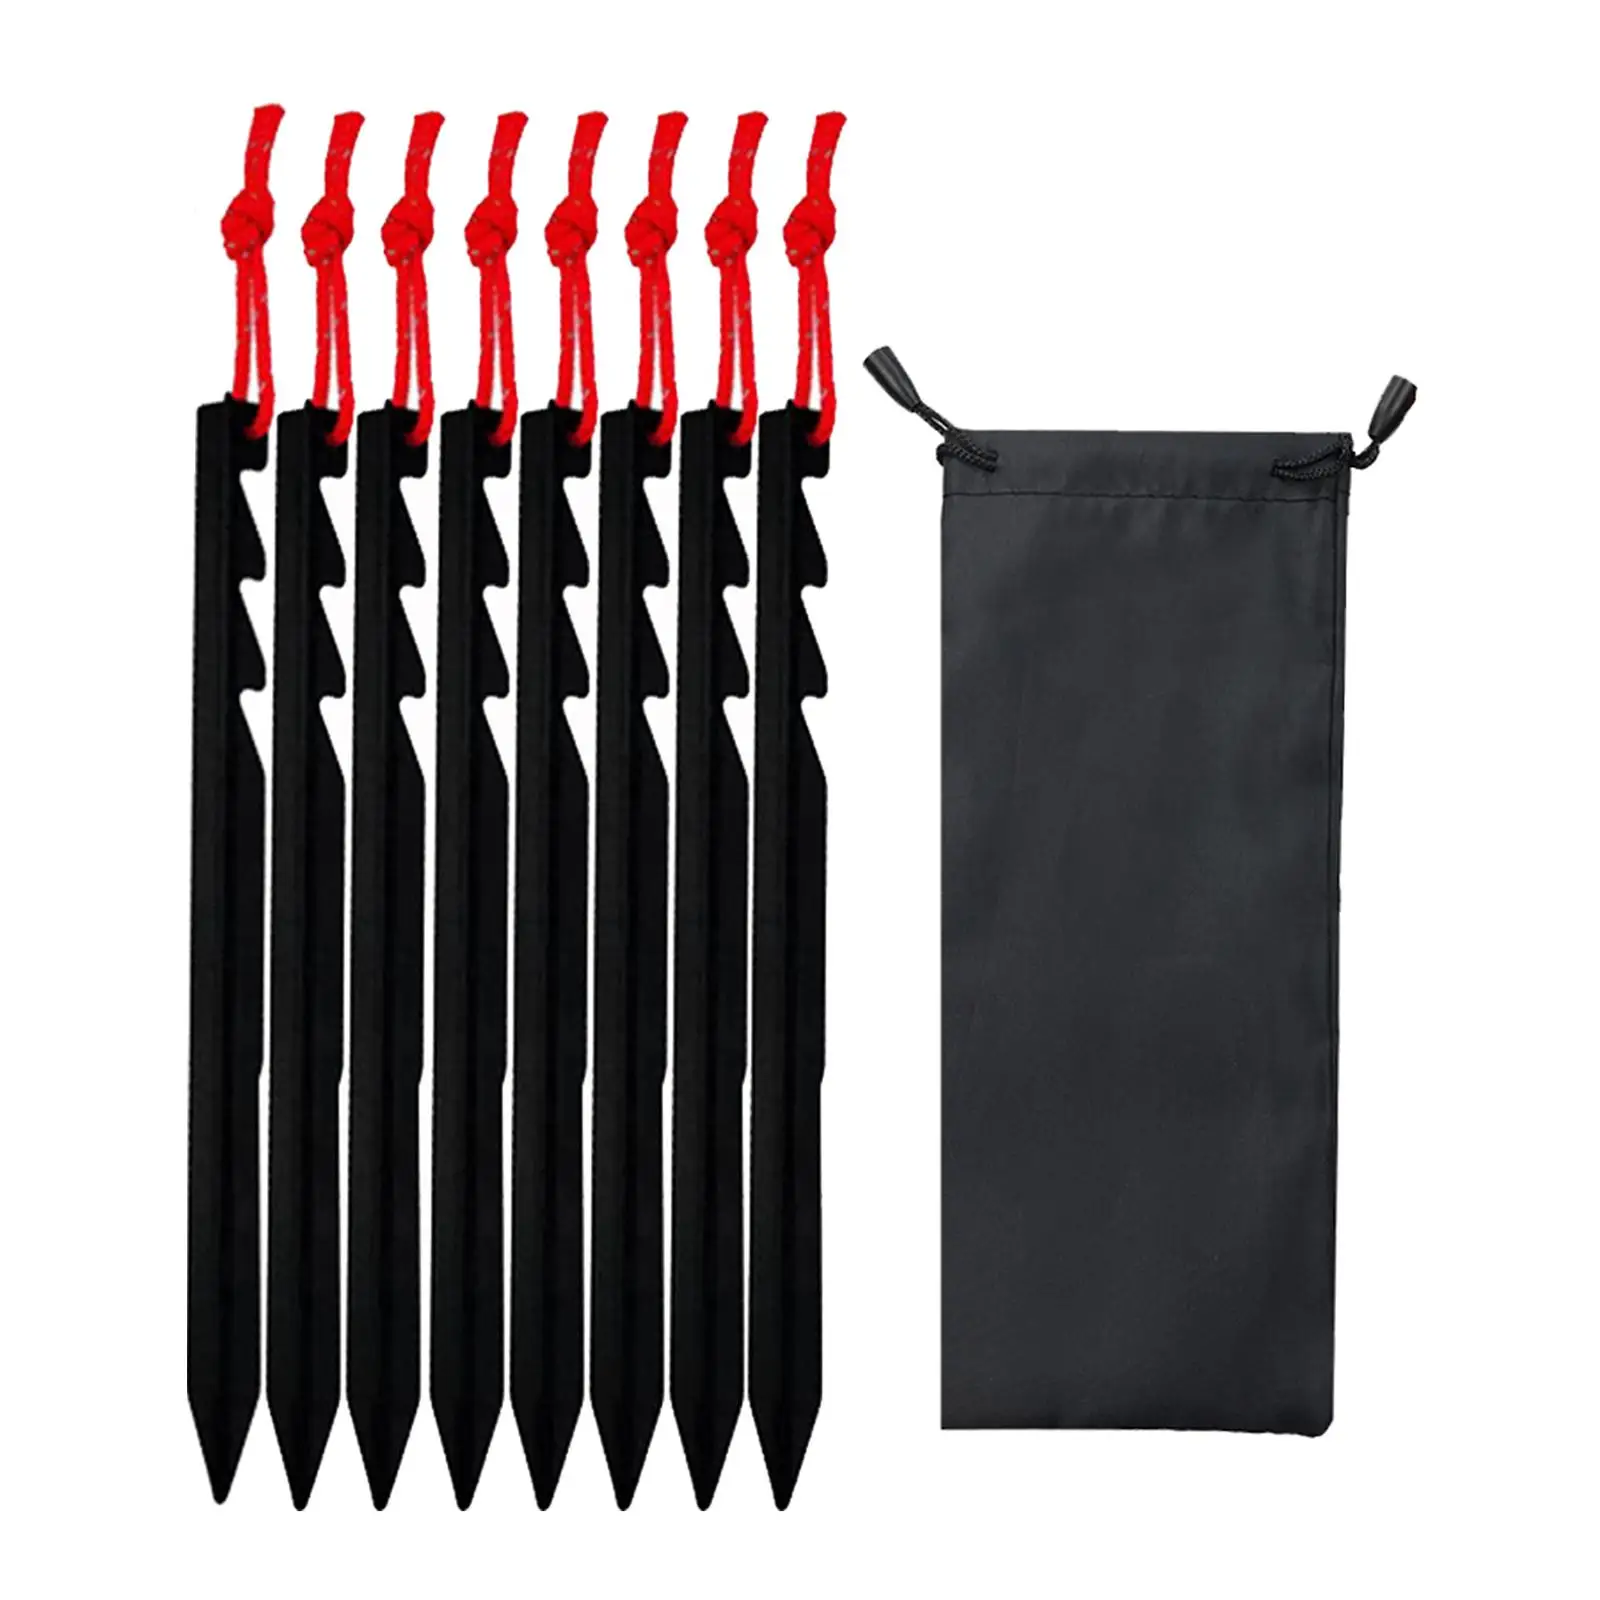 Tent Stakes with Carry Pouch Durable Lightweight Anchors Heavy Duty Tent Pegs Ground Pegs for Outdoor Gardening Hiking Tarp